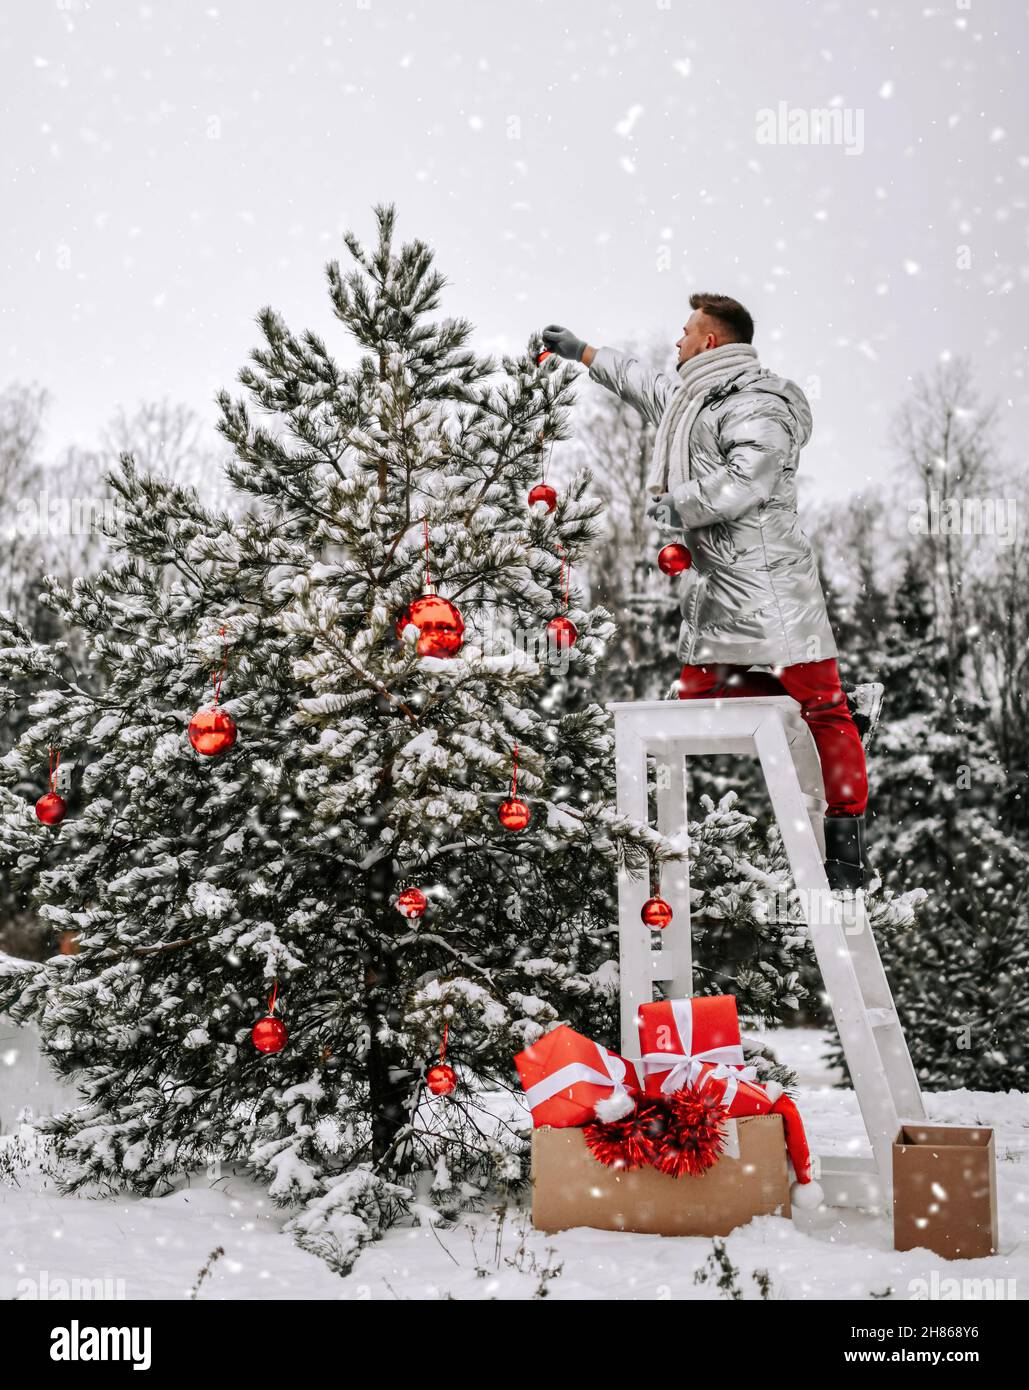 Young man in stylish silver jacket standing on stool and decorating Christmas tree with balls outdoors Stock Photo